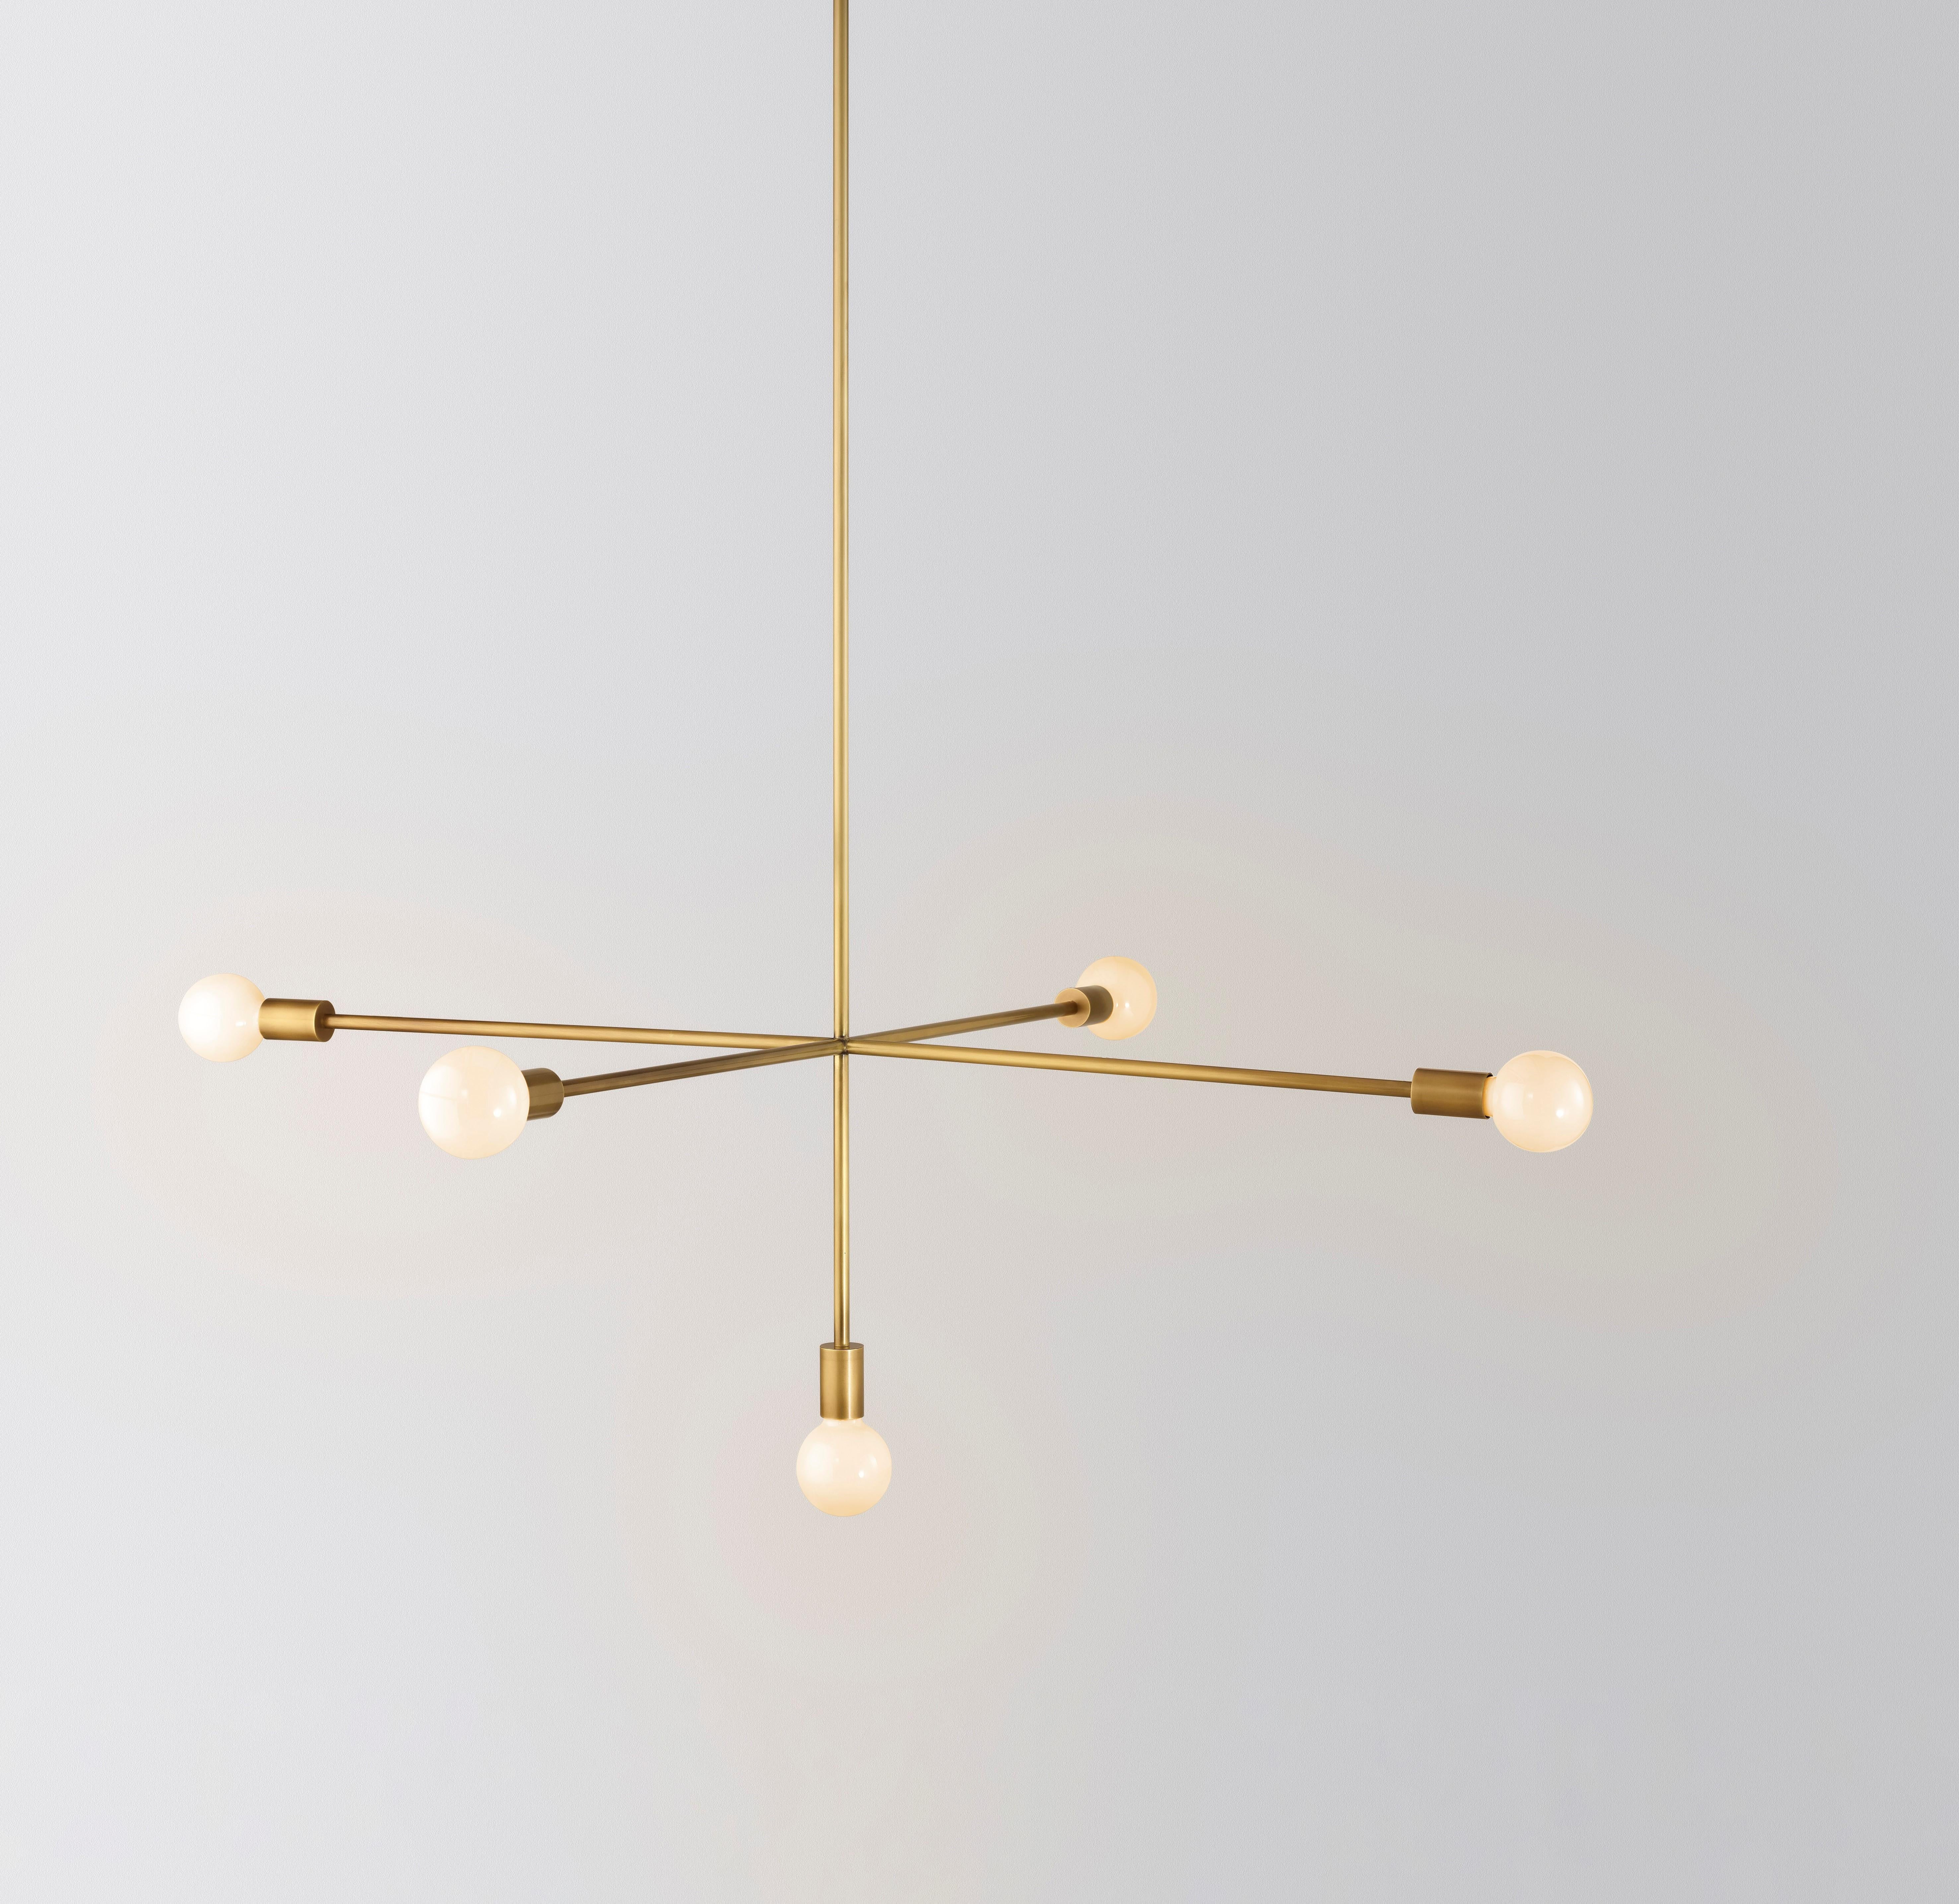 Cross kick low by Volker Haug.
Dimensions: W 133 x D 133 x H 92.
Materials: Brass.

Lamp: Opal G95 LED (E26/E27 110 - 240V)
Suspension: (as specified, minimum 620 mm)
12V version available (110V - 240V driver)

Volker Haug Studio is an